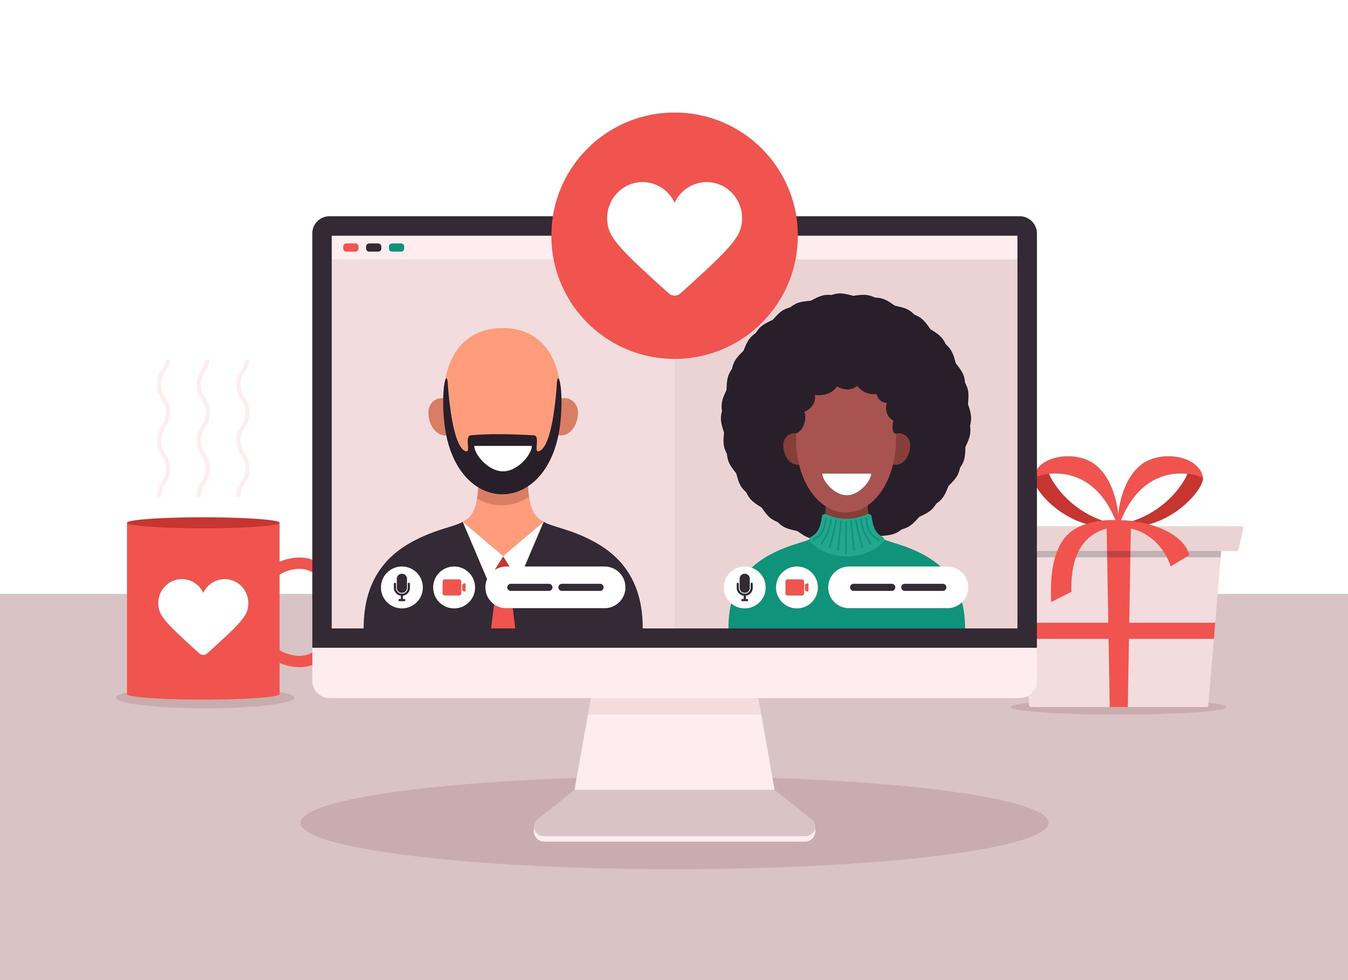 Online dating app concept with man and woman. Flat Vector illustration with african woman and white bald man on laptop screen.